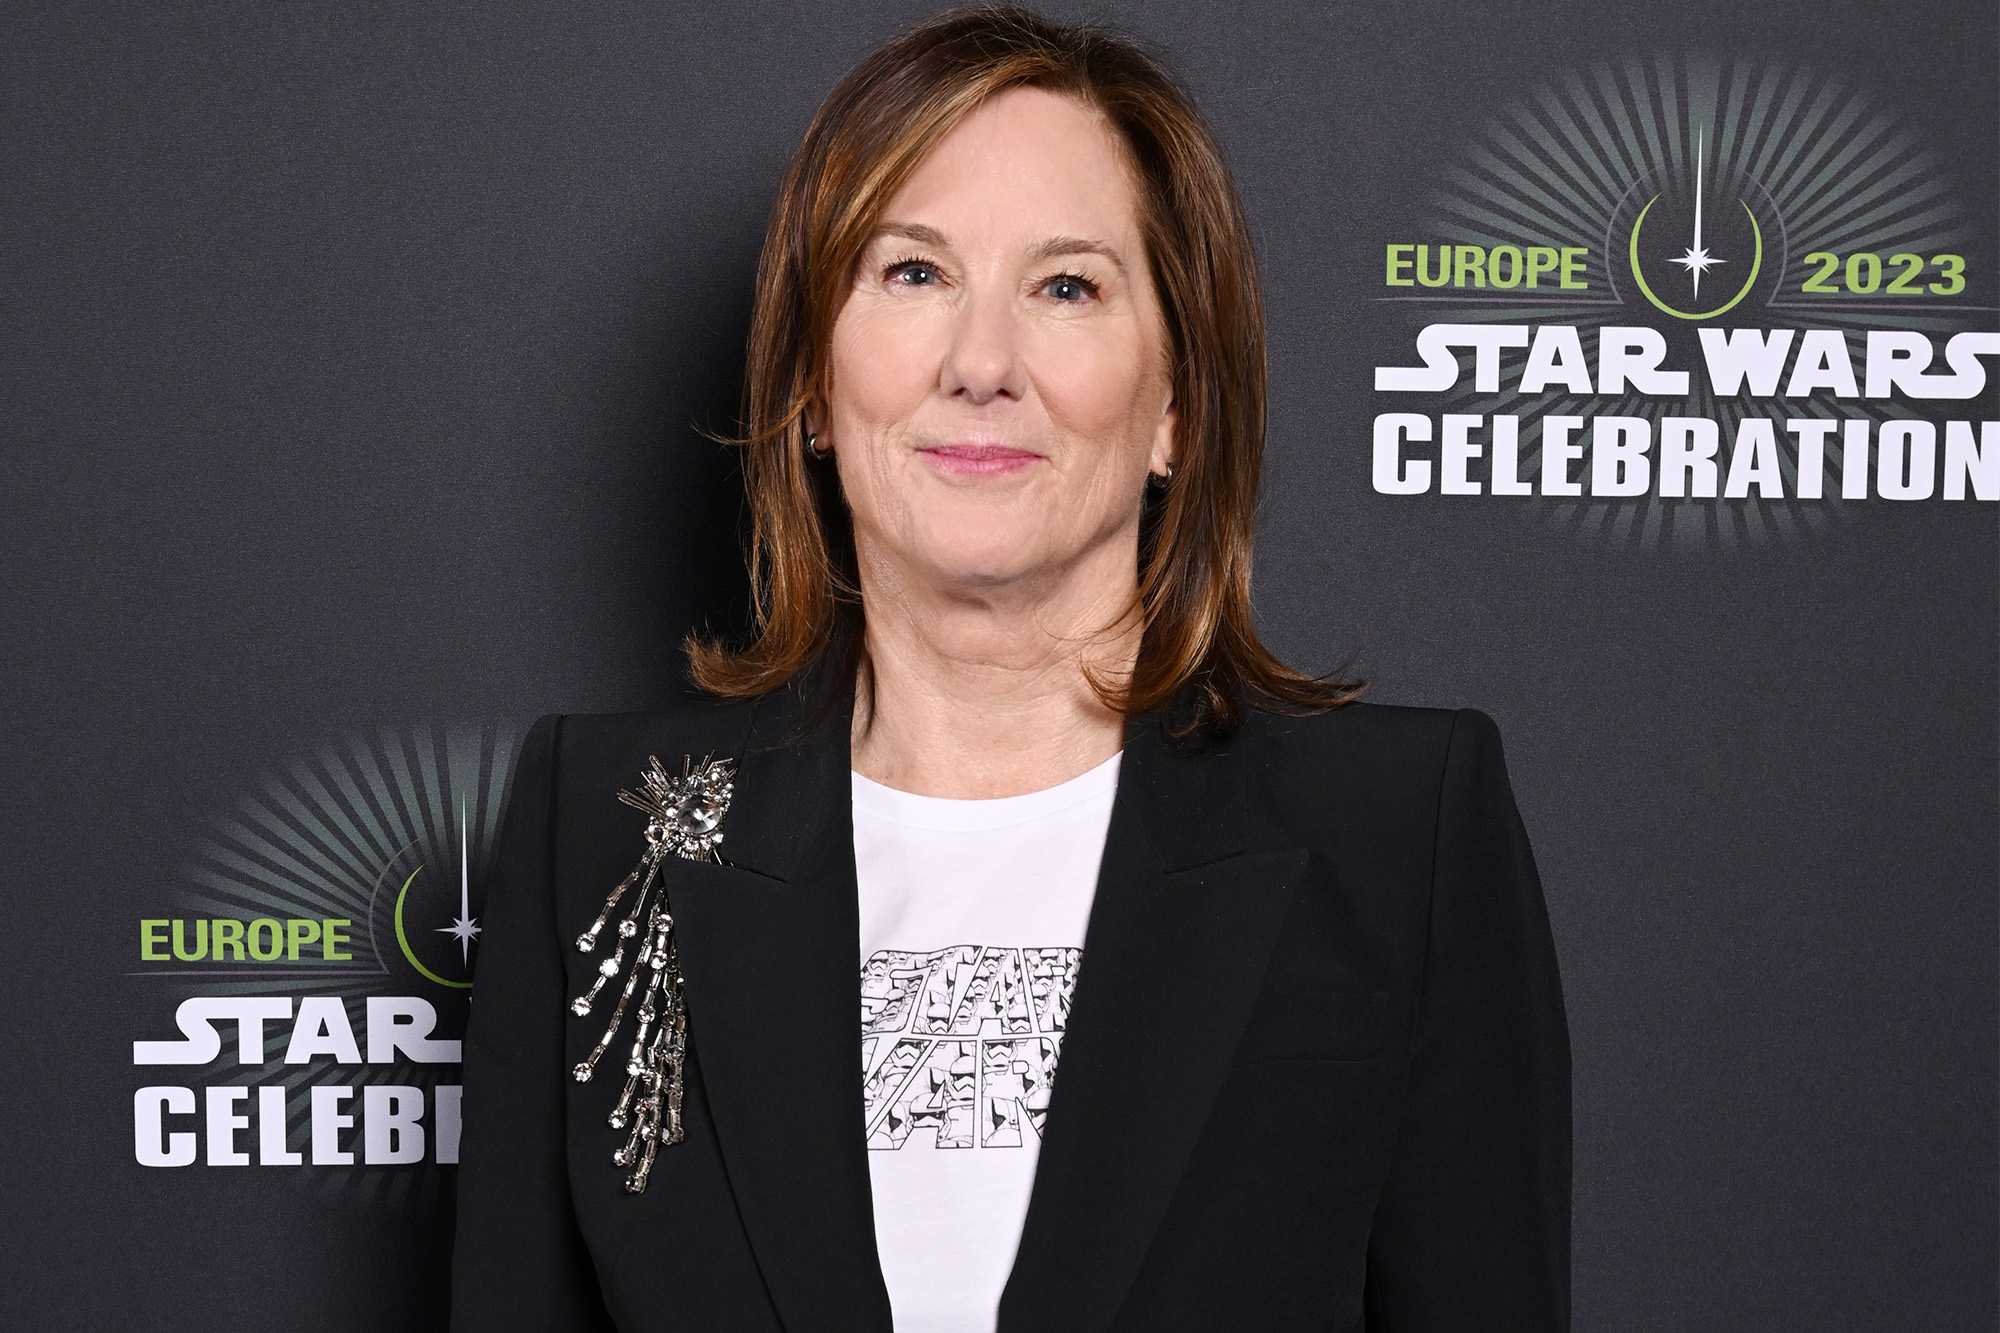 Kathleen Kennedy (Source: Entertainment Weekly)